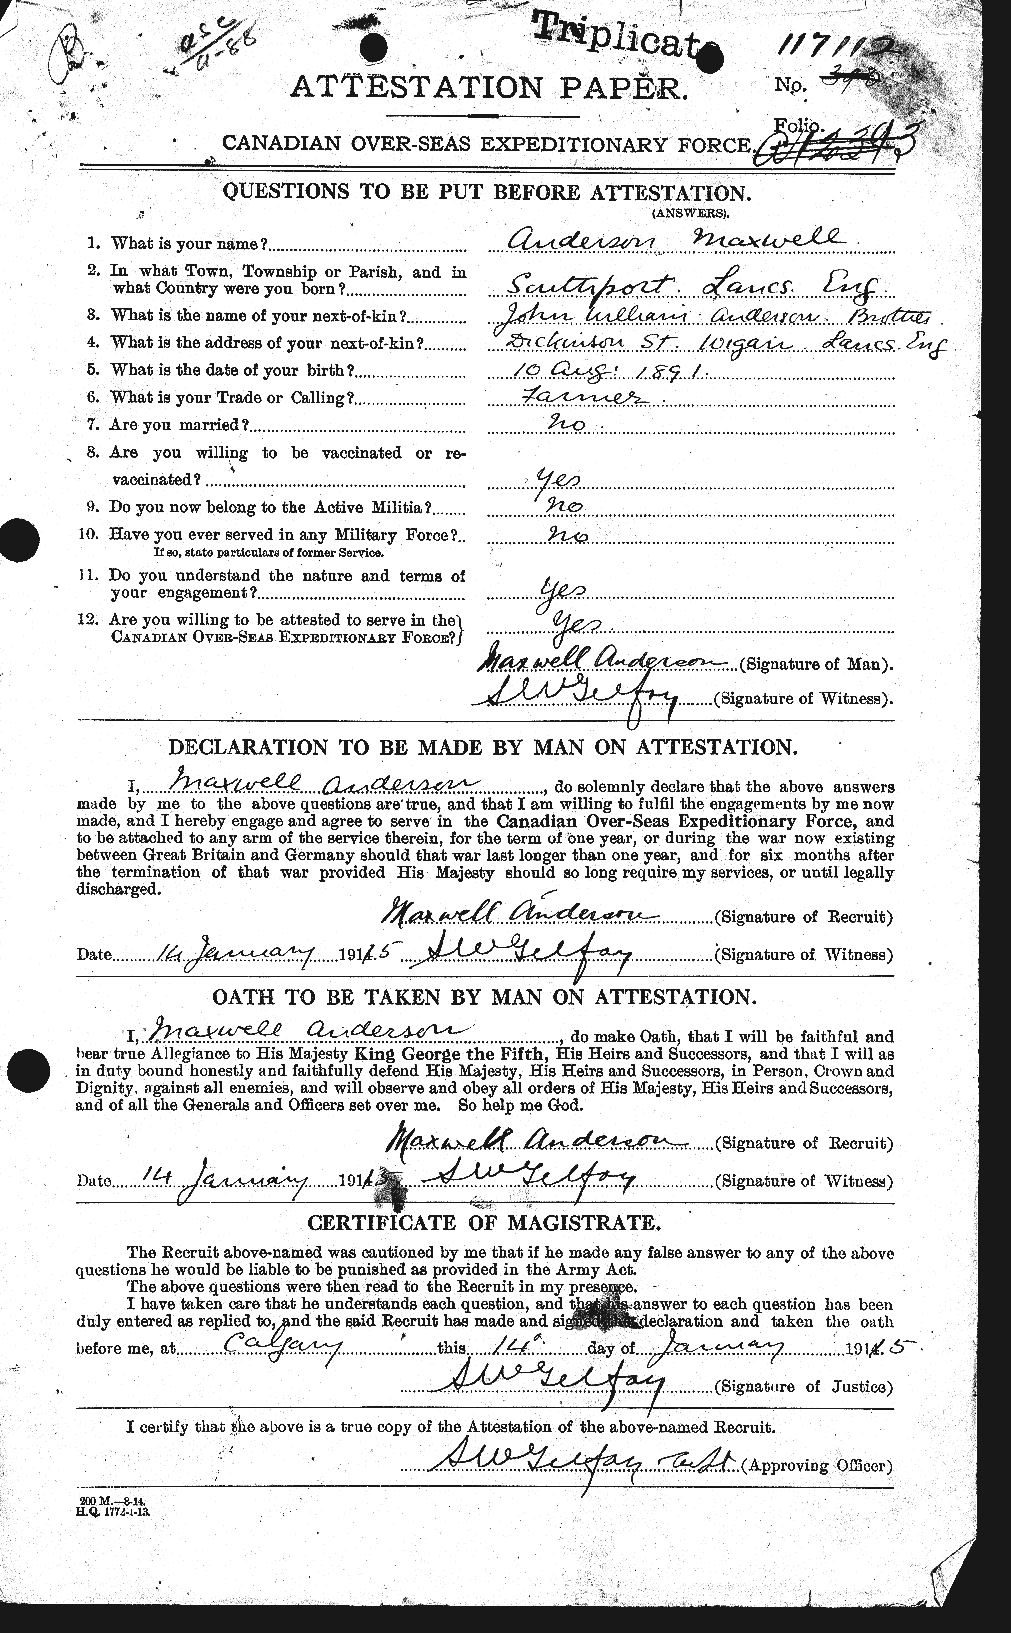 Personnel Records of the First World War - CEF 207462a